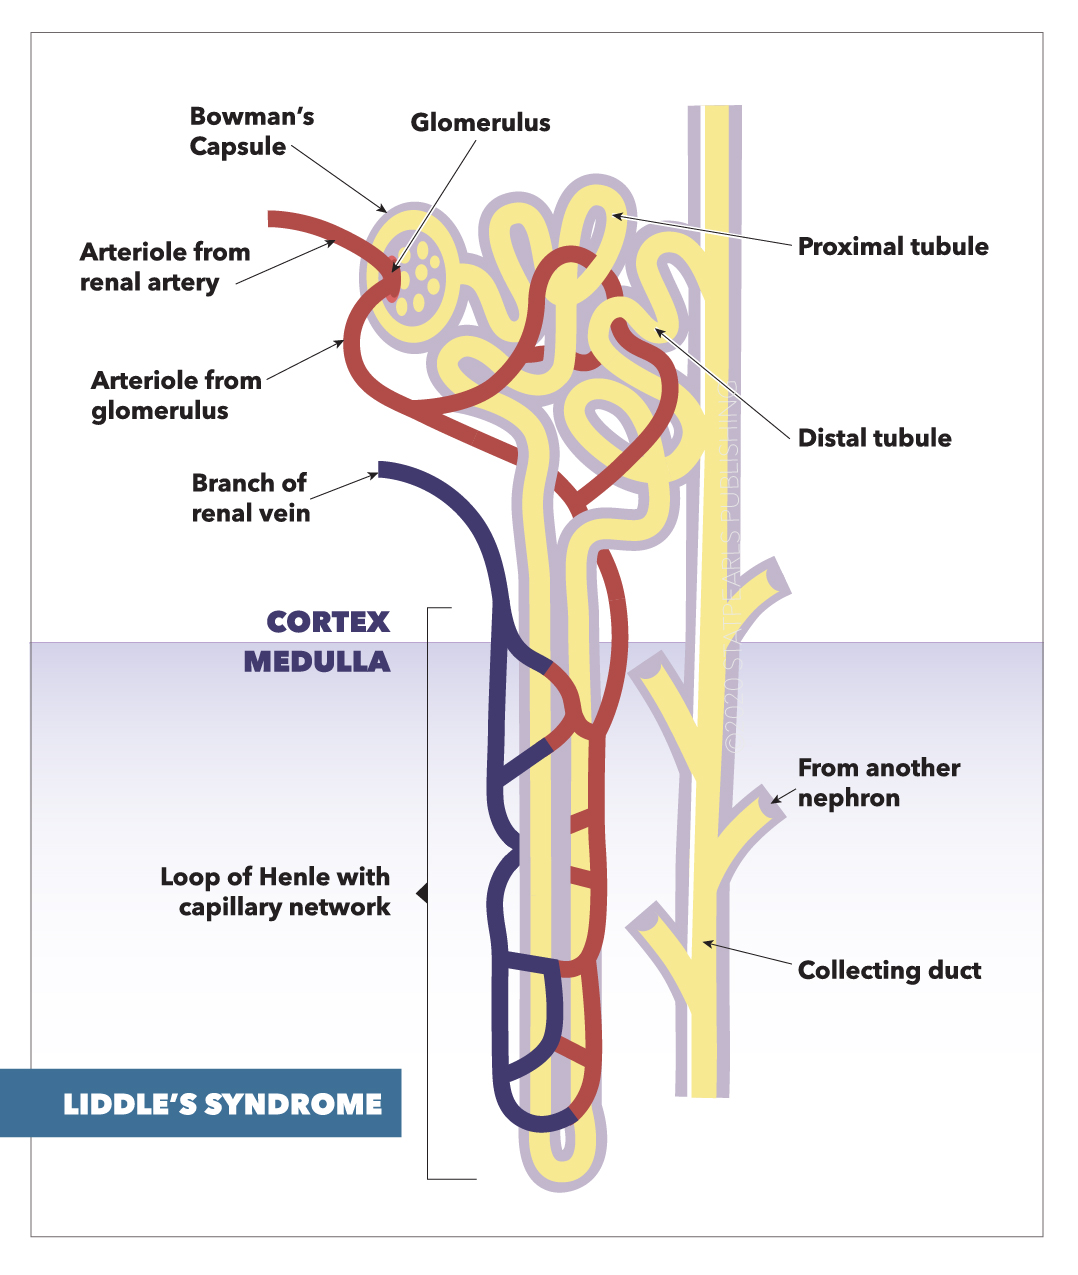 Liddle's syndrome, arteriole from renal artery, arteriole from glomerulus, Loop of Henle with capillary network,  glomerulus, proximal tubule, distal tubule, collecting duct